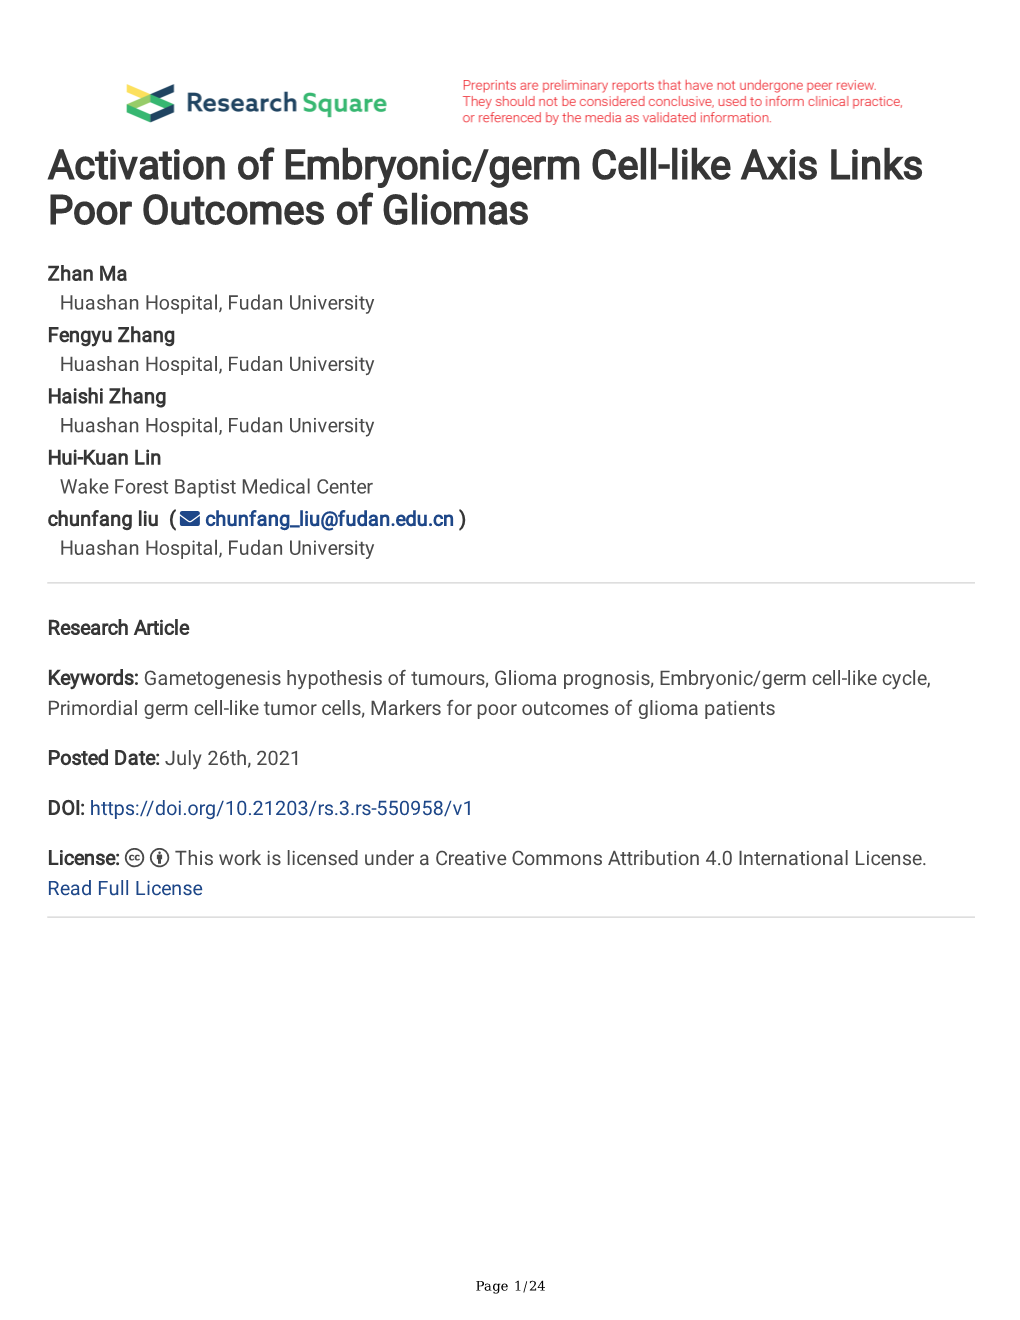 Activation of Embryonic/Germ Cell-Like Axis Links Poor Outcomes of Gliomas